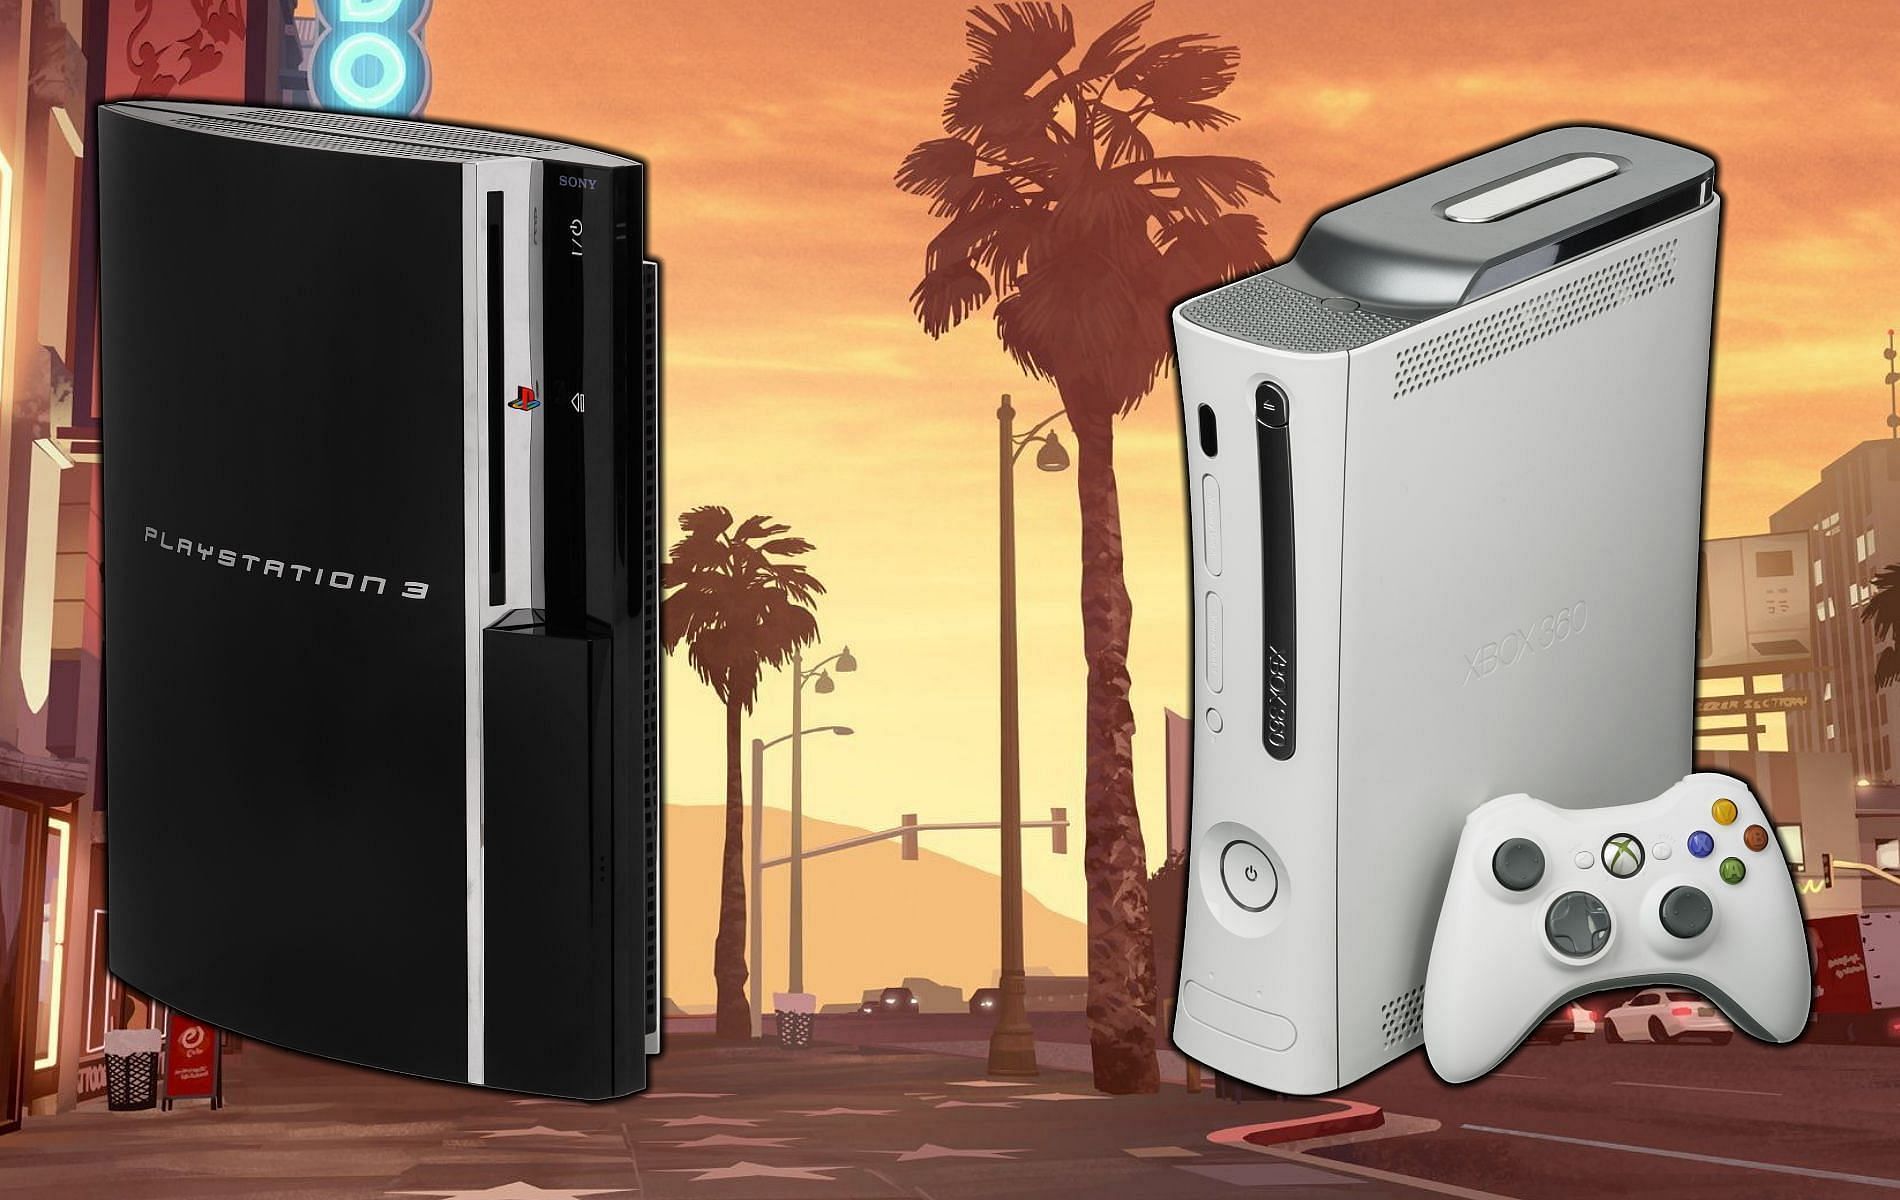 PS3 and Xbox 360 players can no longer play GTA Online (Image via Rockstar Games, Sony, Microsoft)